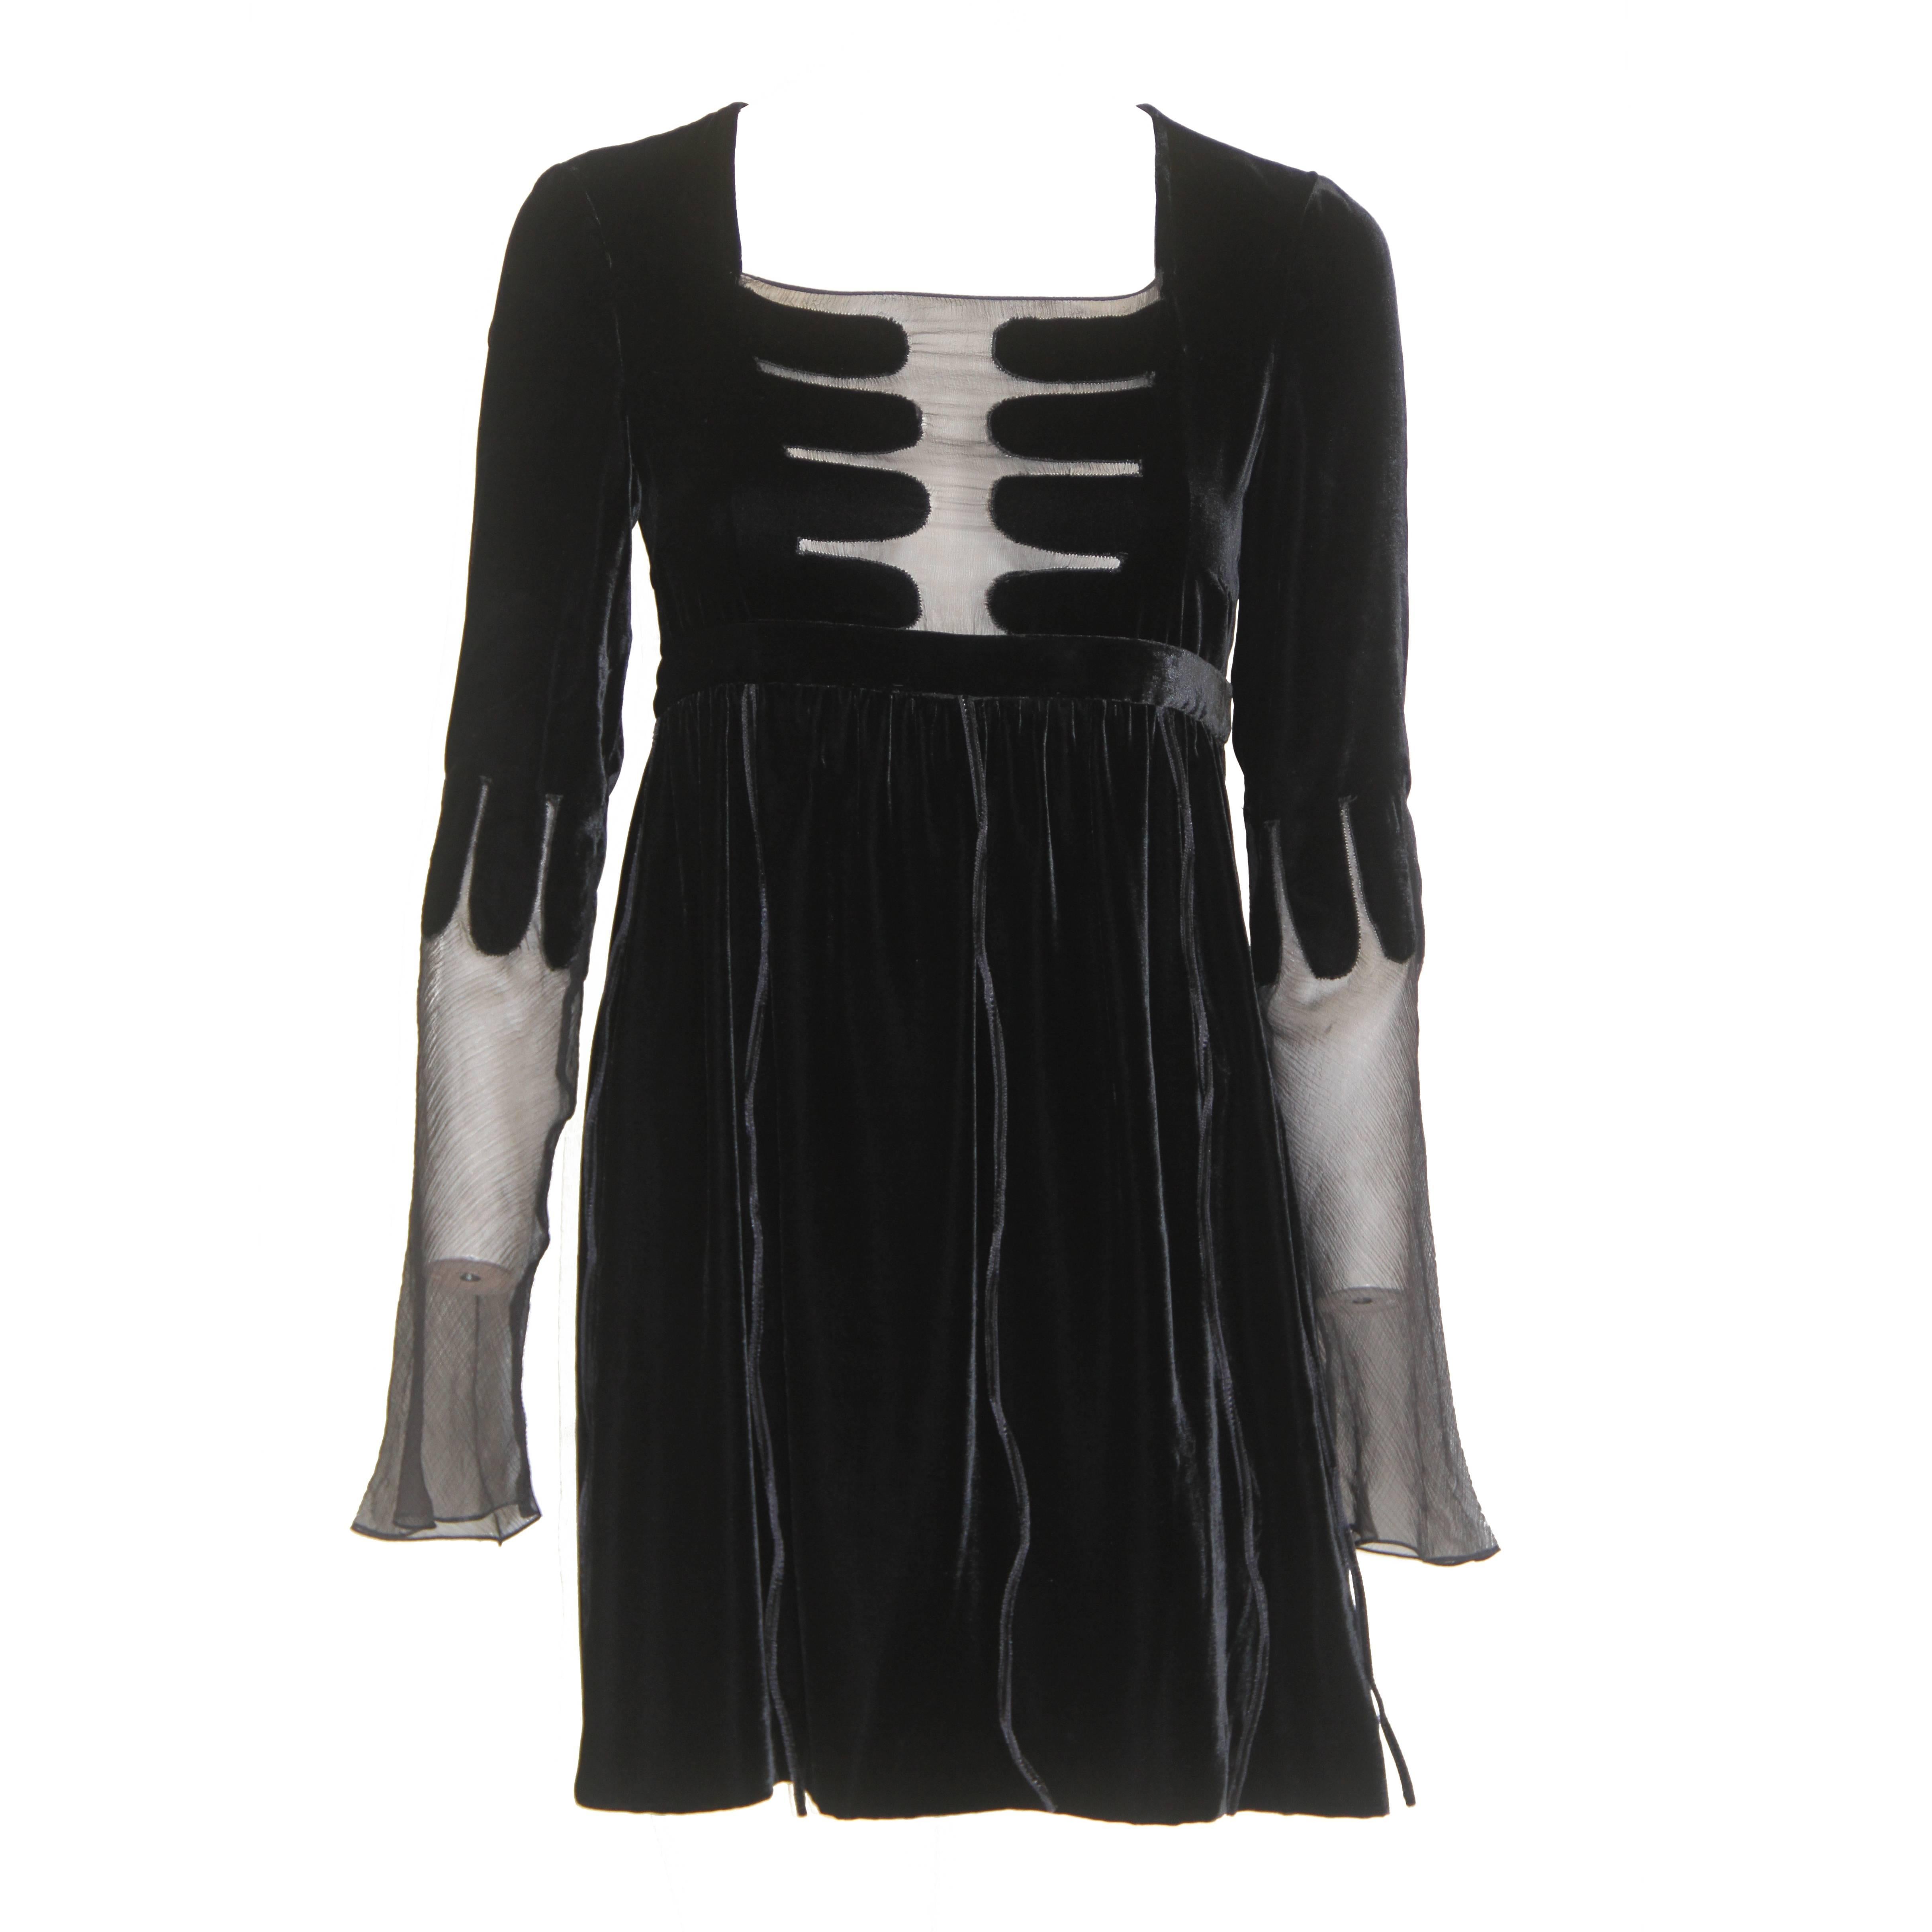 Iconic Tom Ford For Gucci Finale Babydoll Dress Fall 2001 For Sale